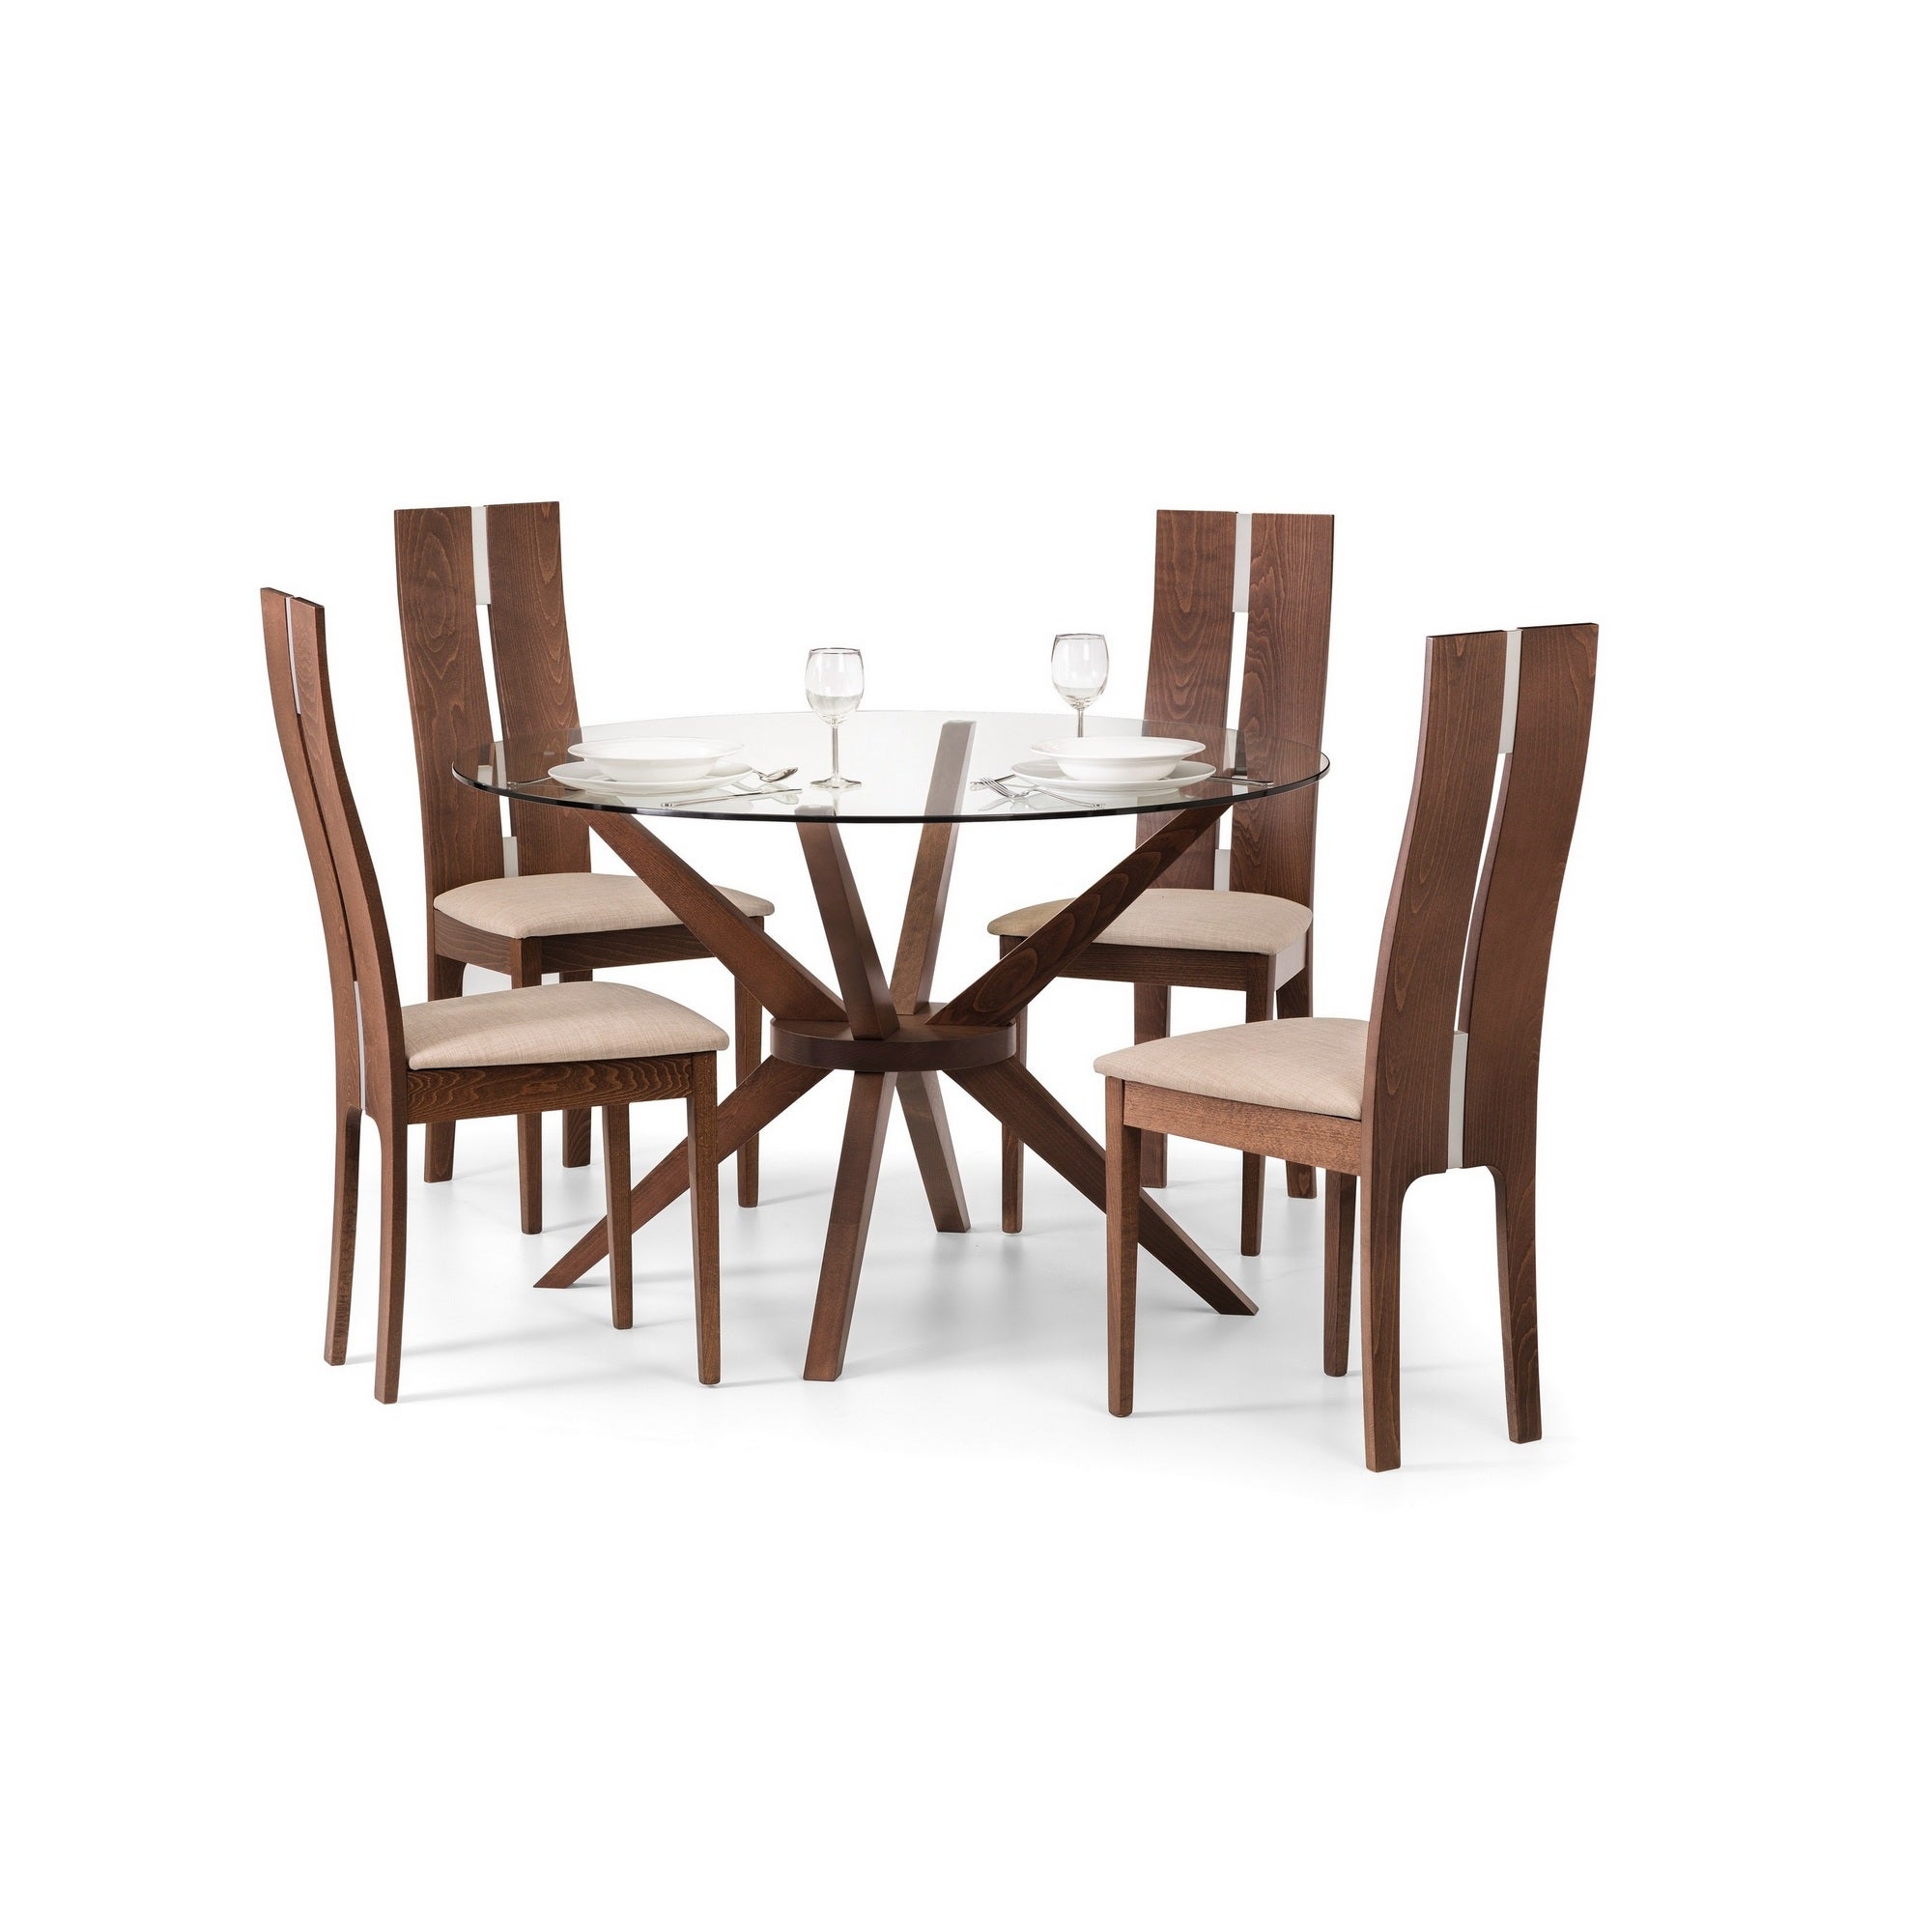 Chelsea Round Glass Top Dining Table with 4 Cayman Chairs Brown